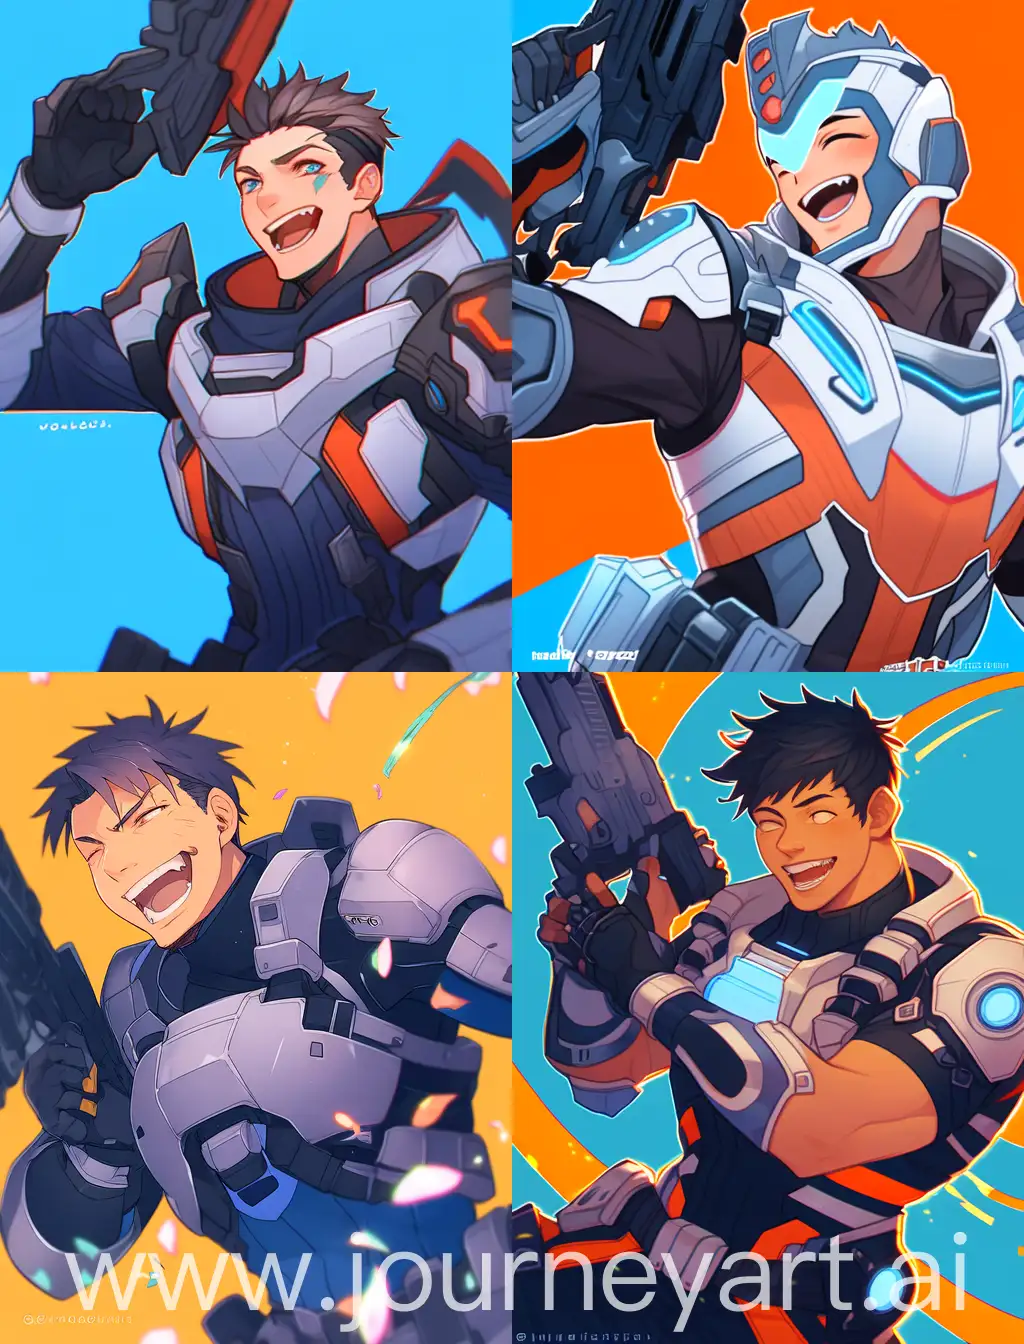 anime guy with future armor laughing, he holding a gun, with blue and orange background